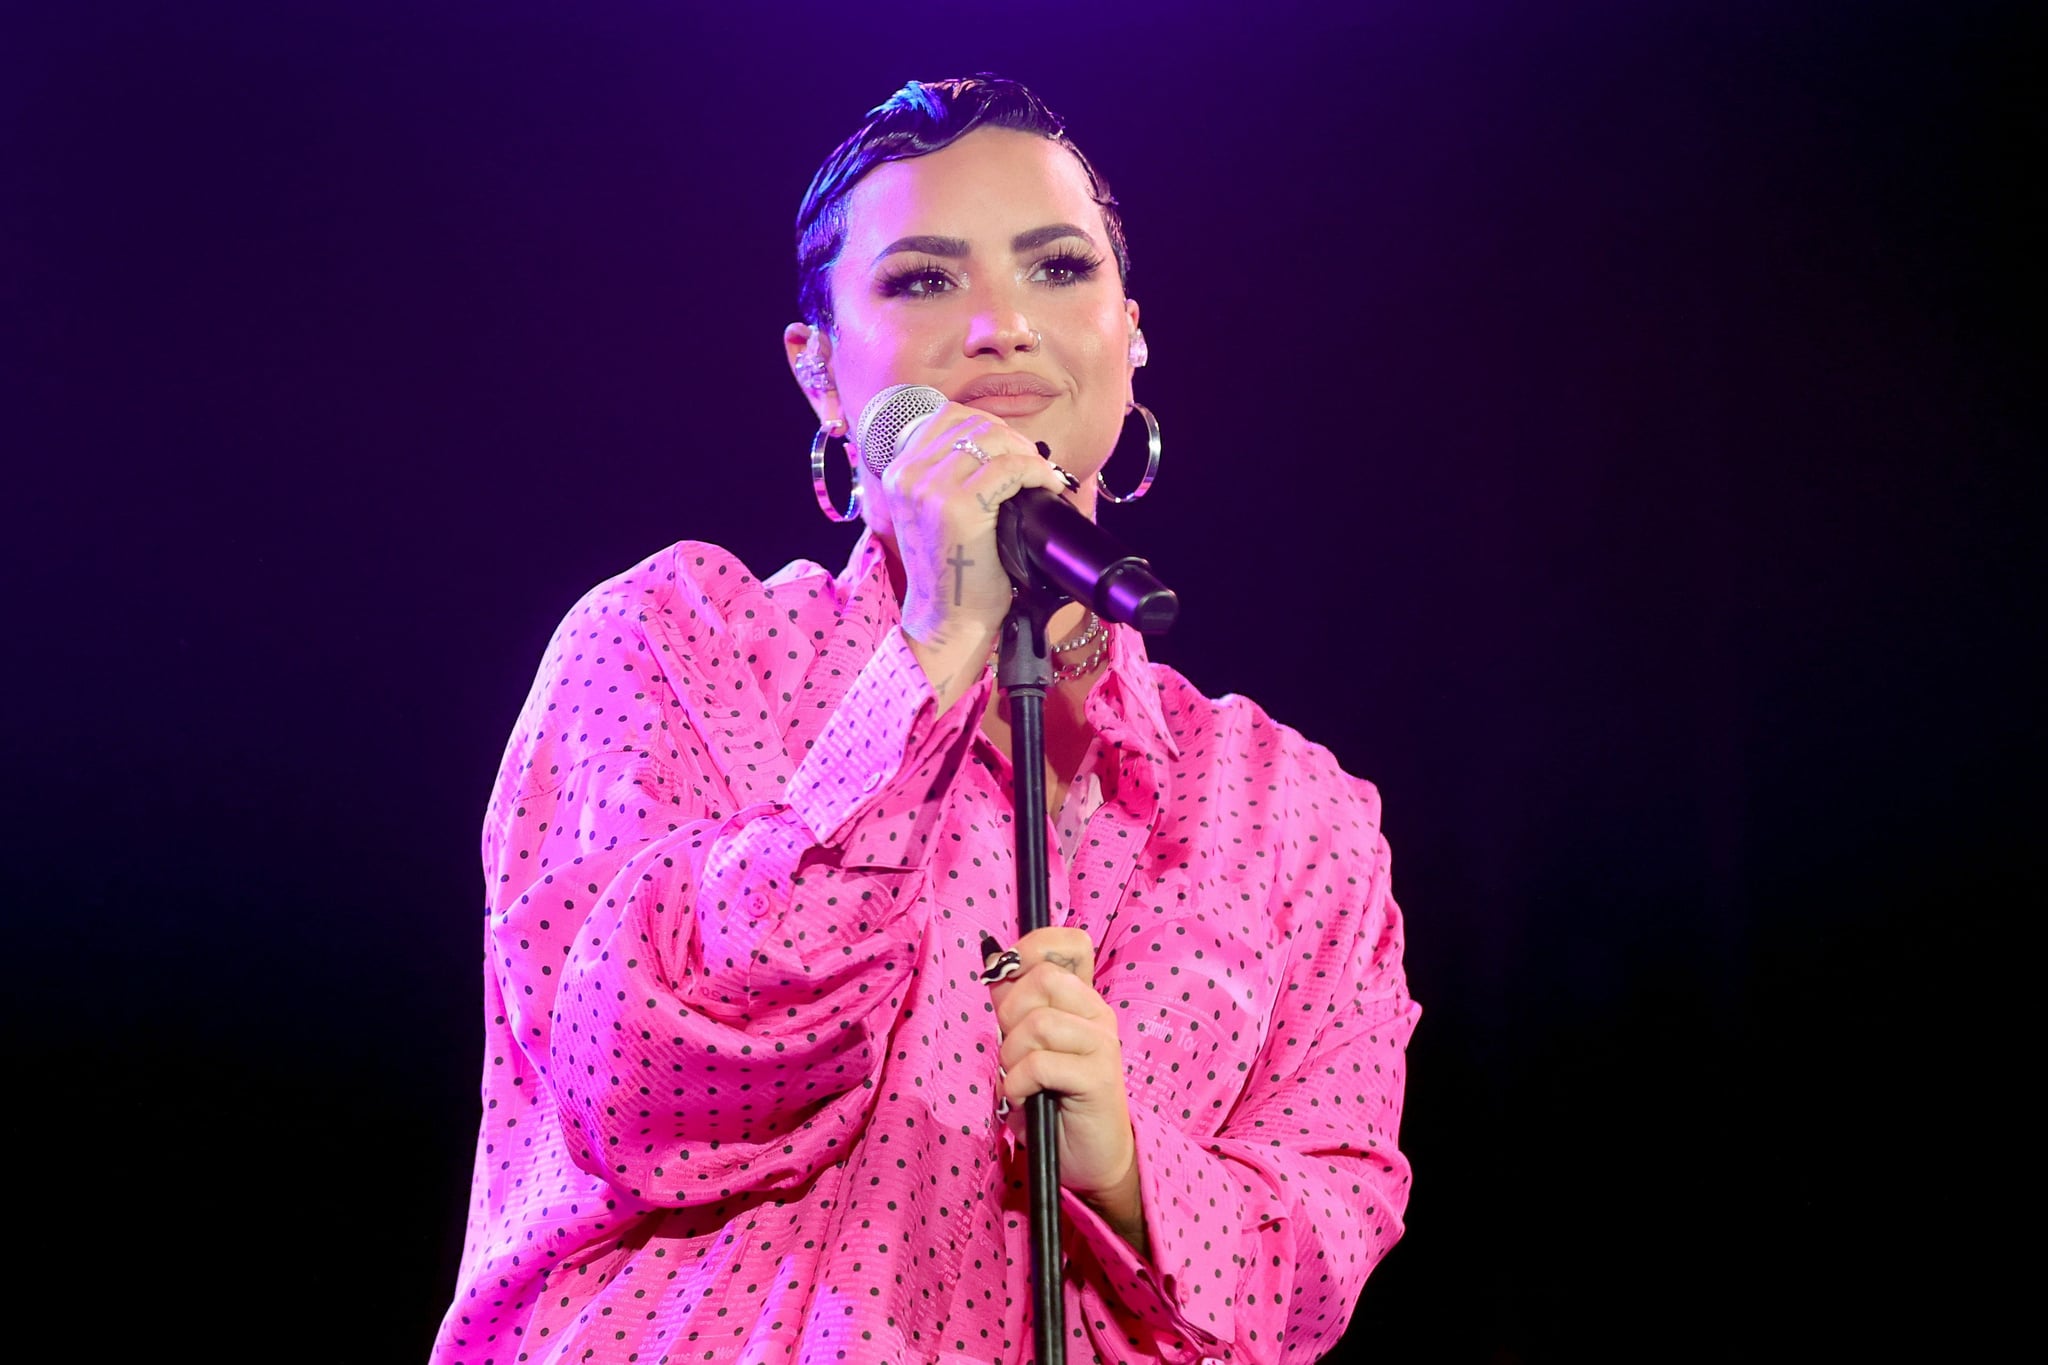 BEVERLY HILLS, CALIFORNIA - MARCH 22: Demi Lovato performs onstage during the OBB Premiere Event for YouTube Originals Docuseries